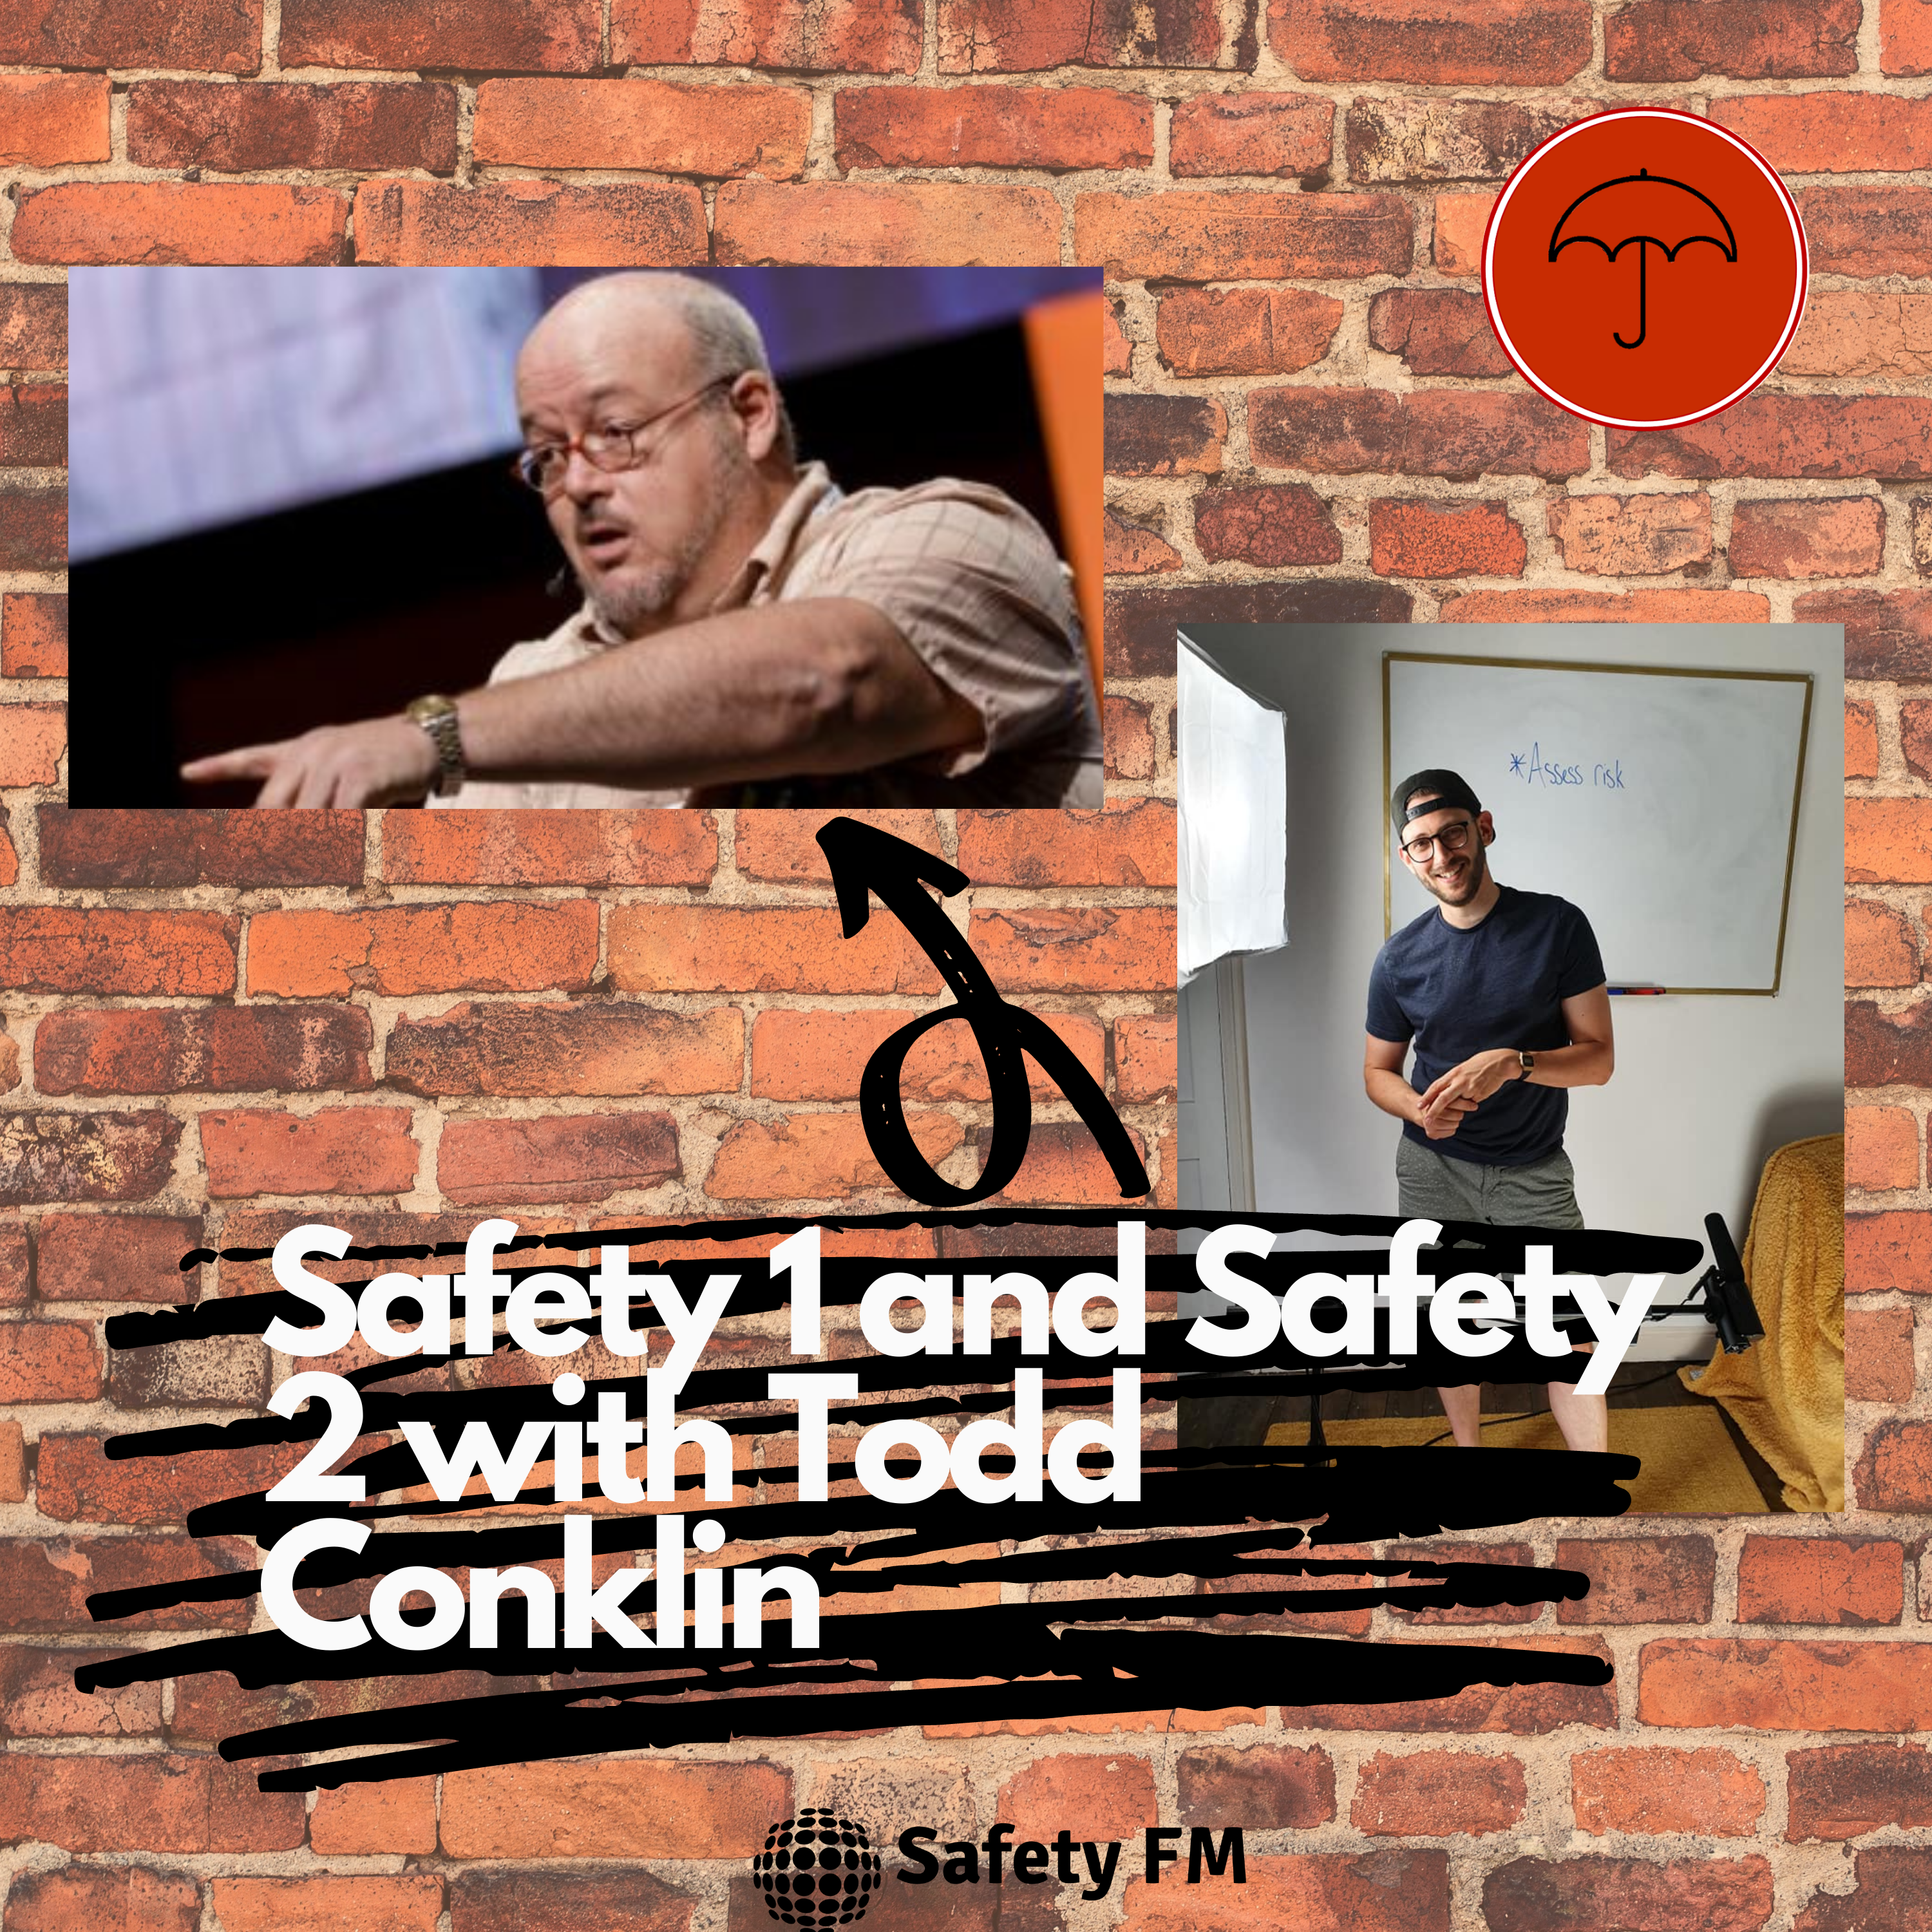 Safety 1 and Safety 2 with Todd Conklin